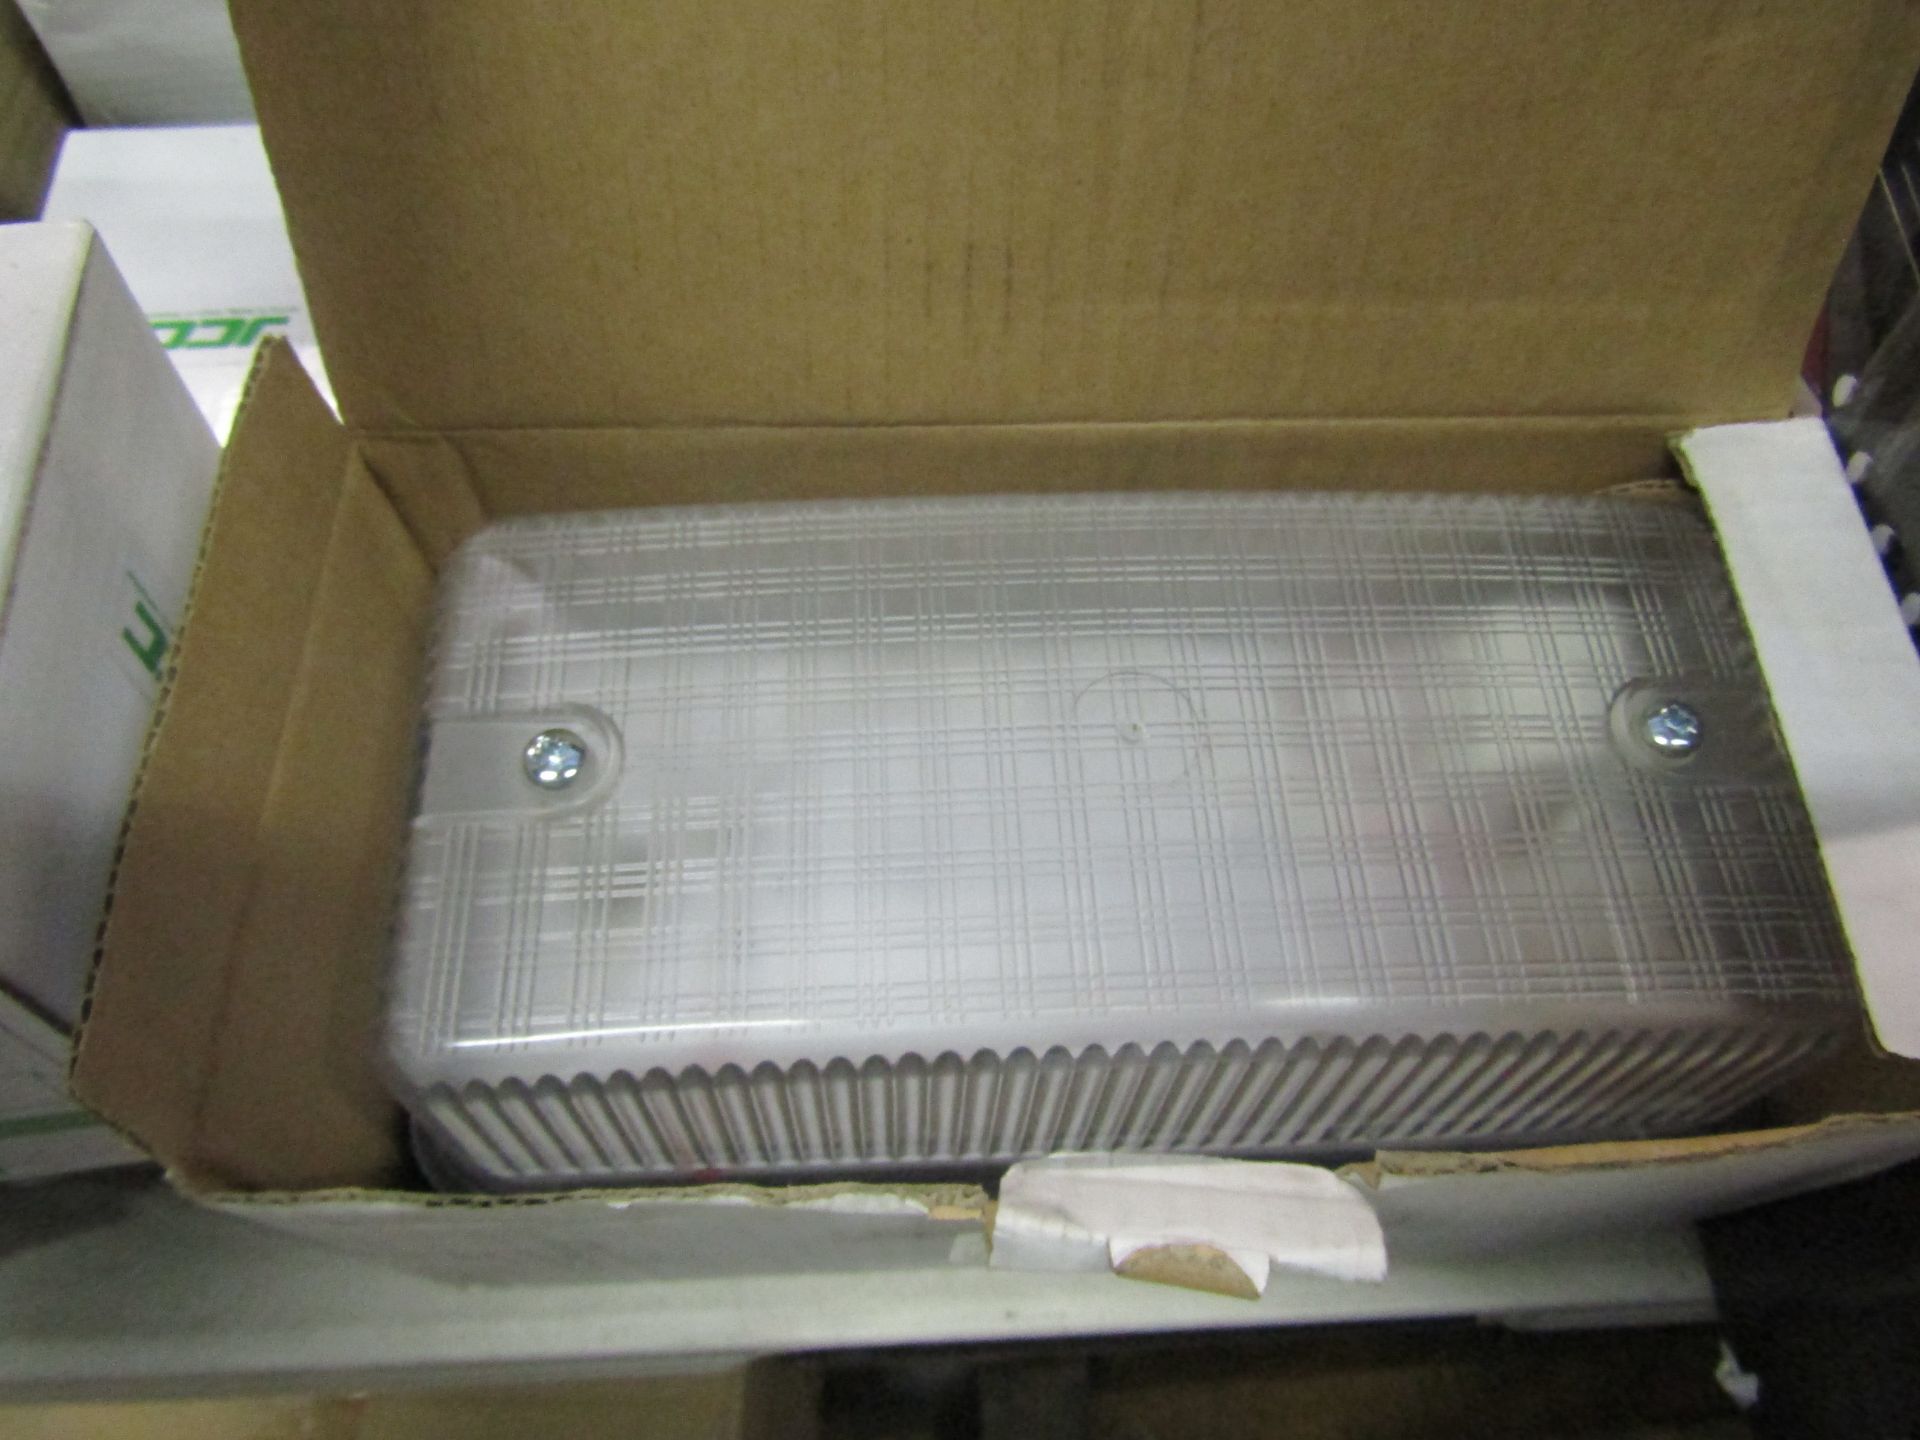 Deluce Bulk Head Light, boxed and new